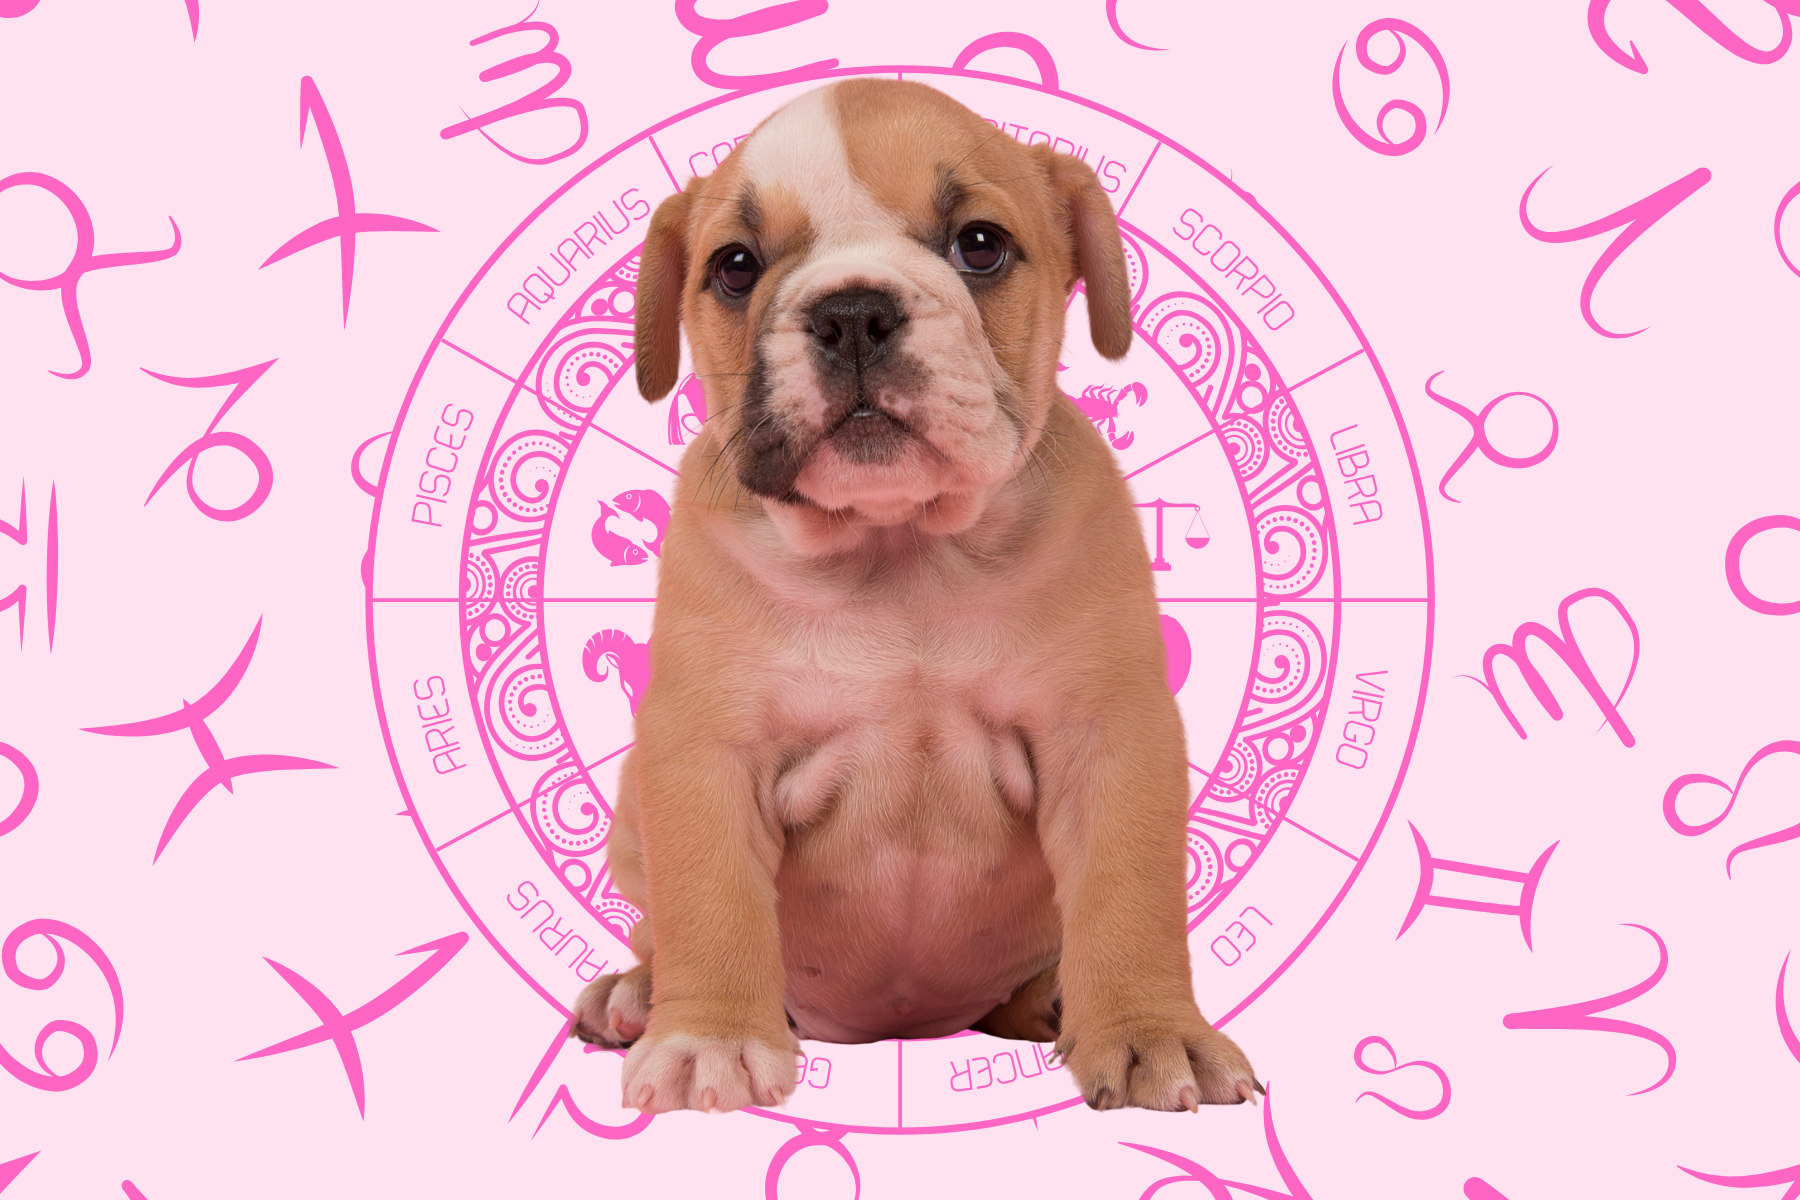 Your Dog's Weekly Horoscope 2020: April 6-12